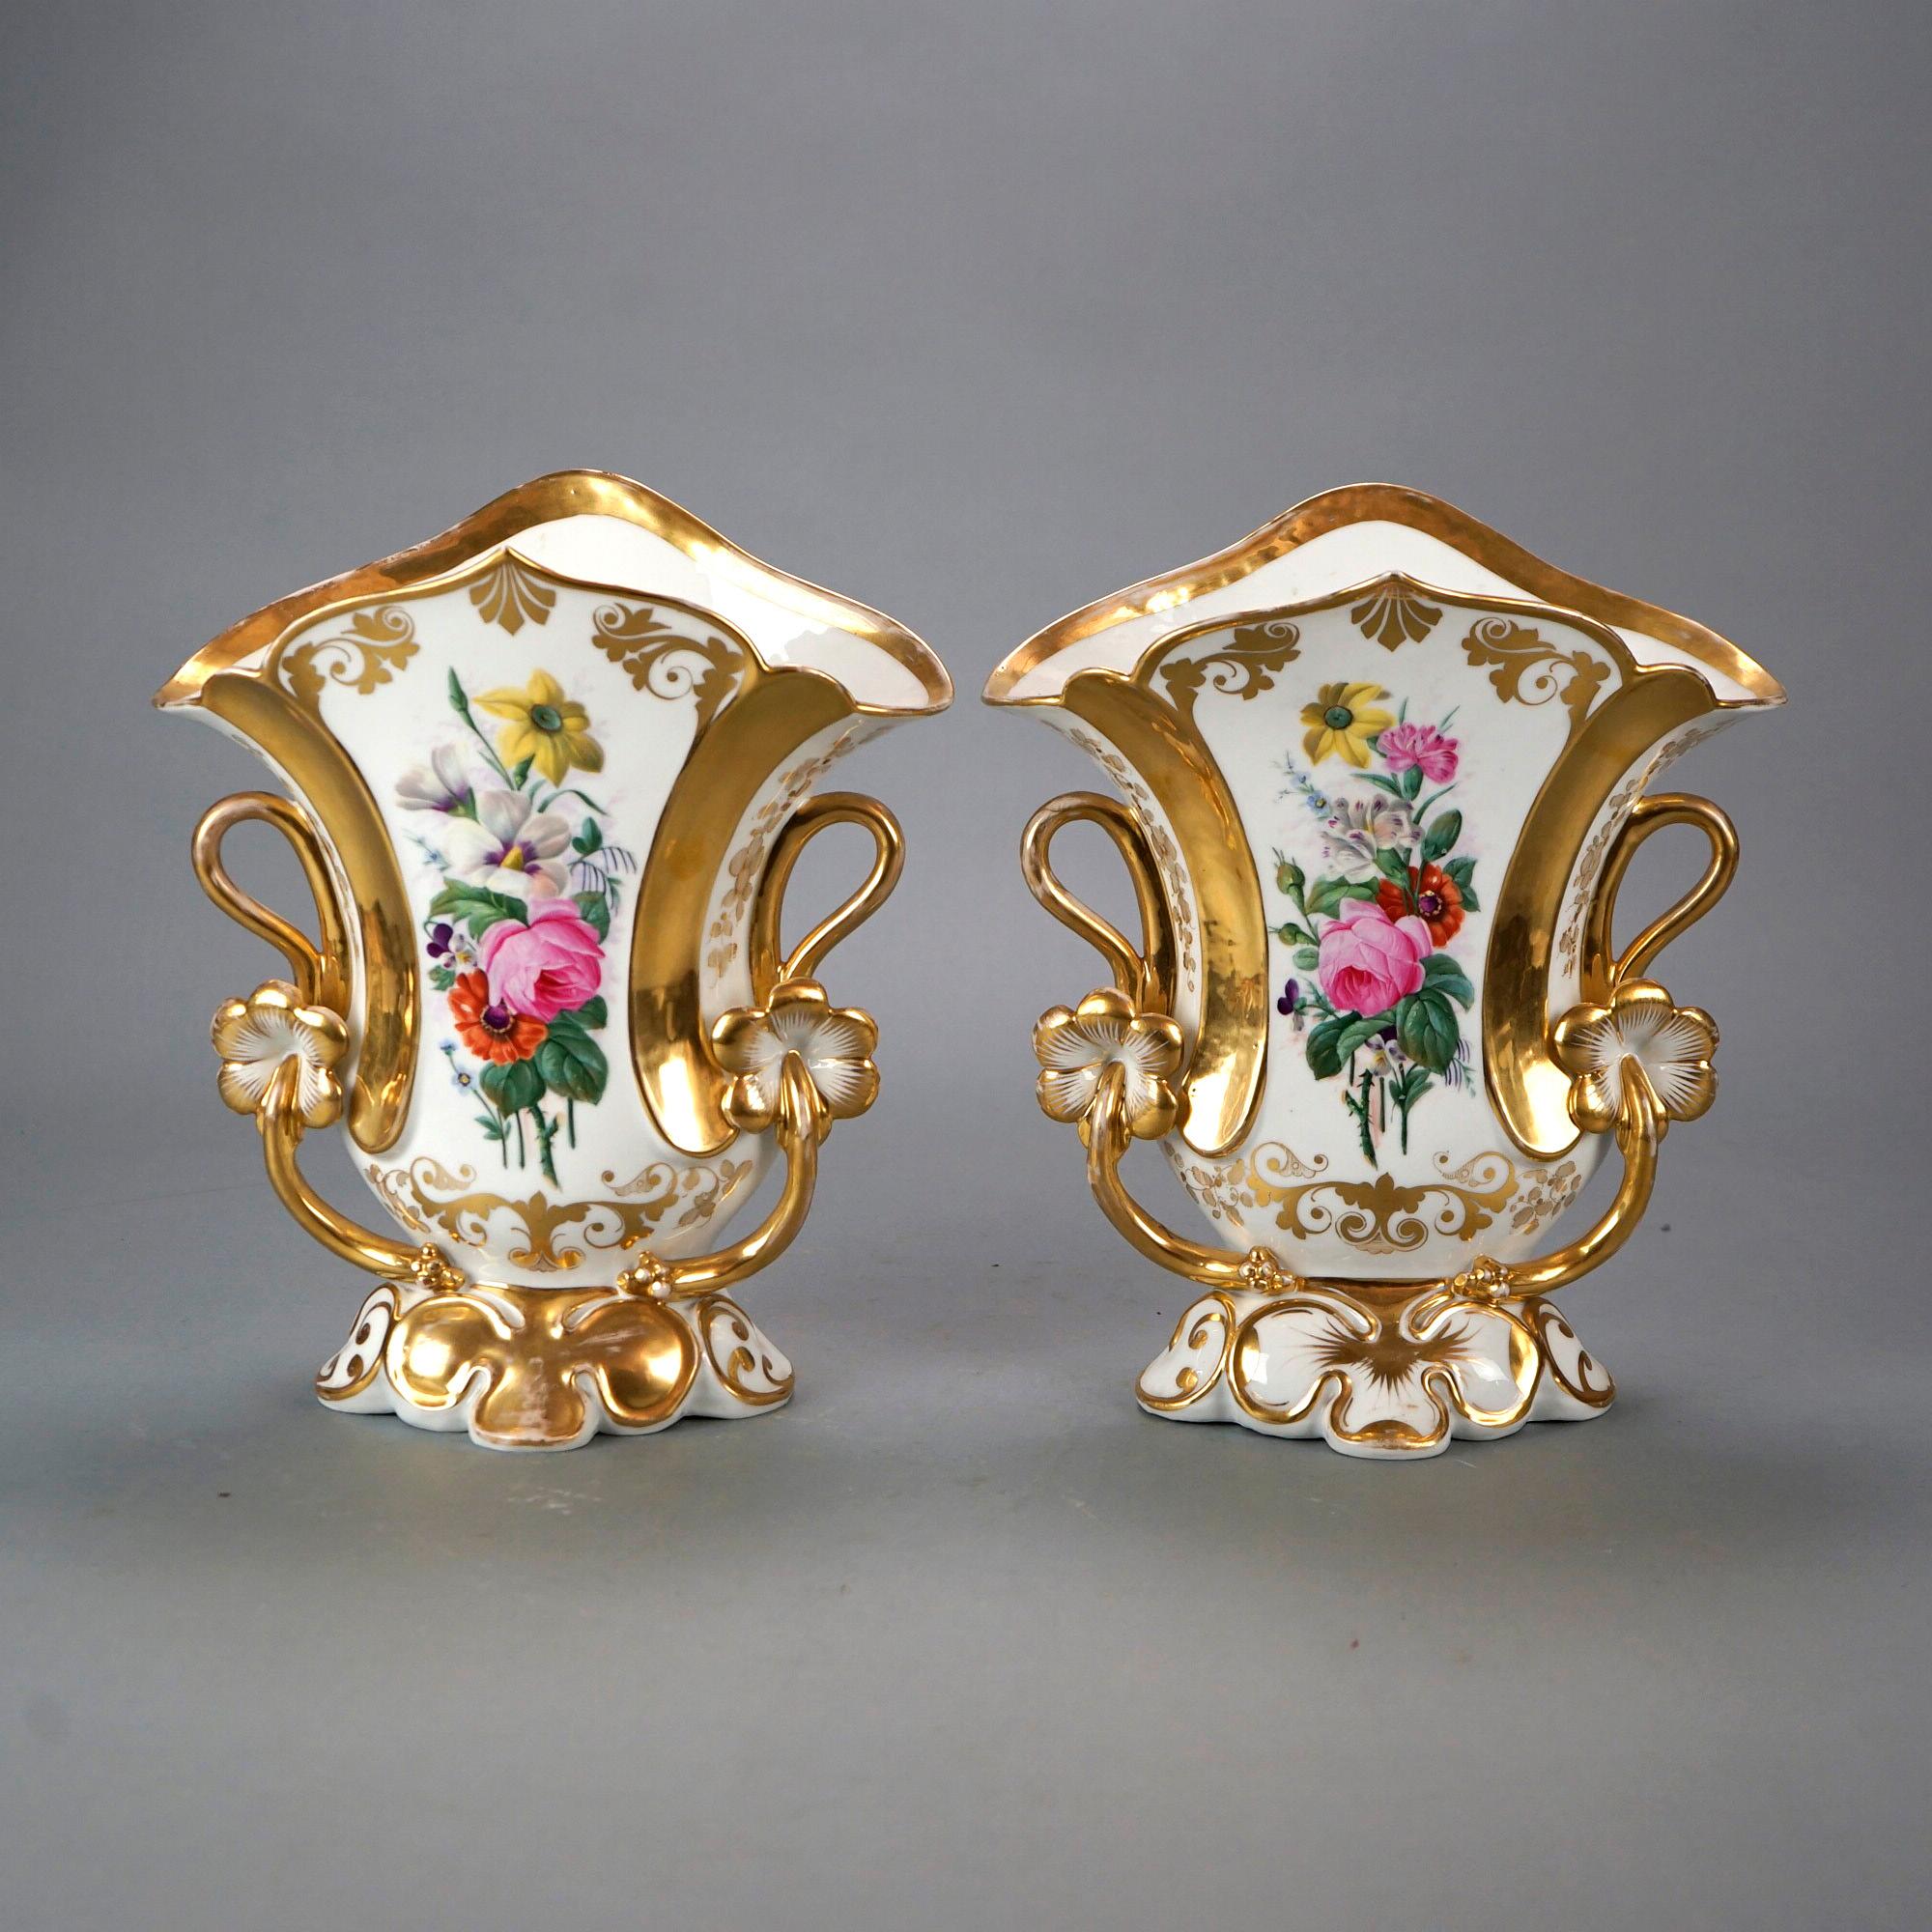 A pair of antique French Old Paris spill vases offer porcelain footed construction with hand painted floral decoration and gilt highlights throughout, 19th century

Measures- 12'' H x 10.5'' W x 6.25'' D.